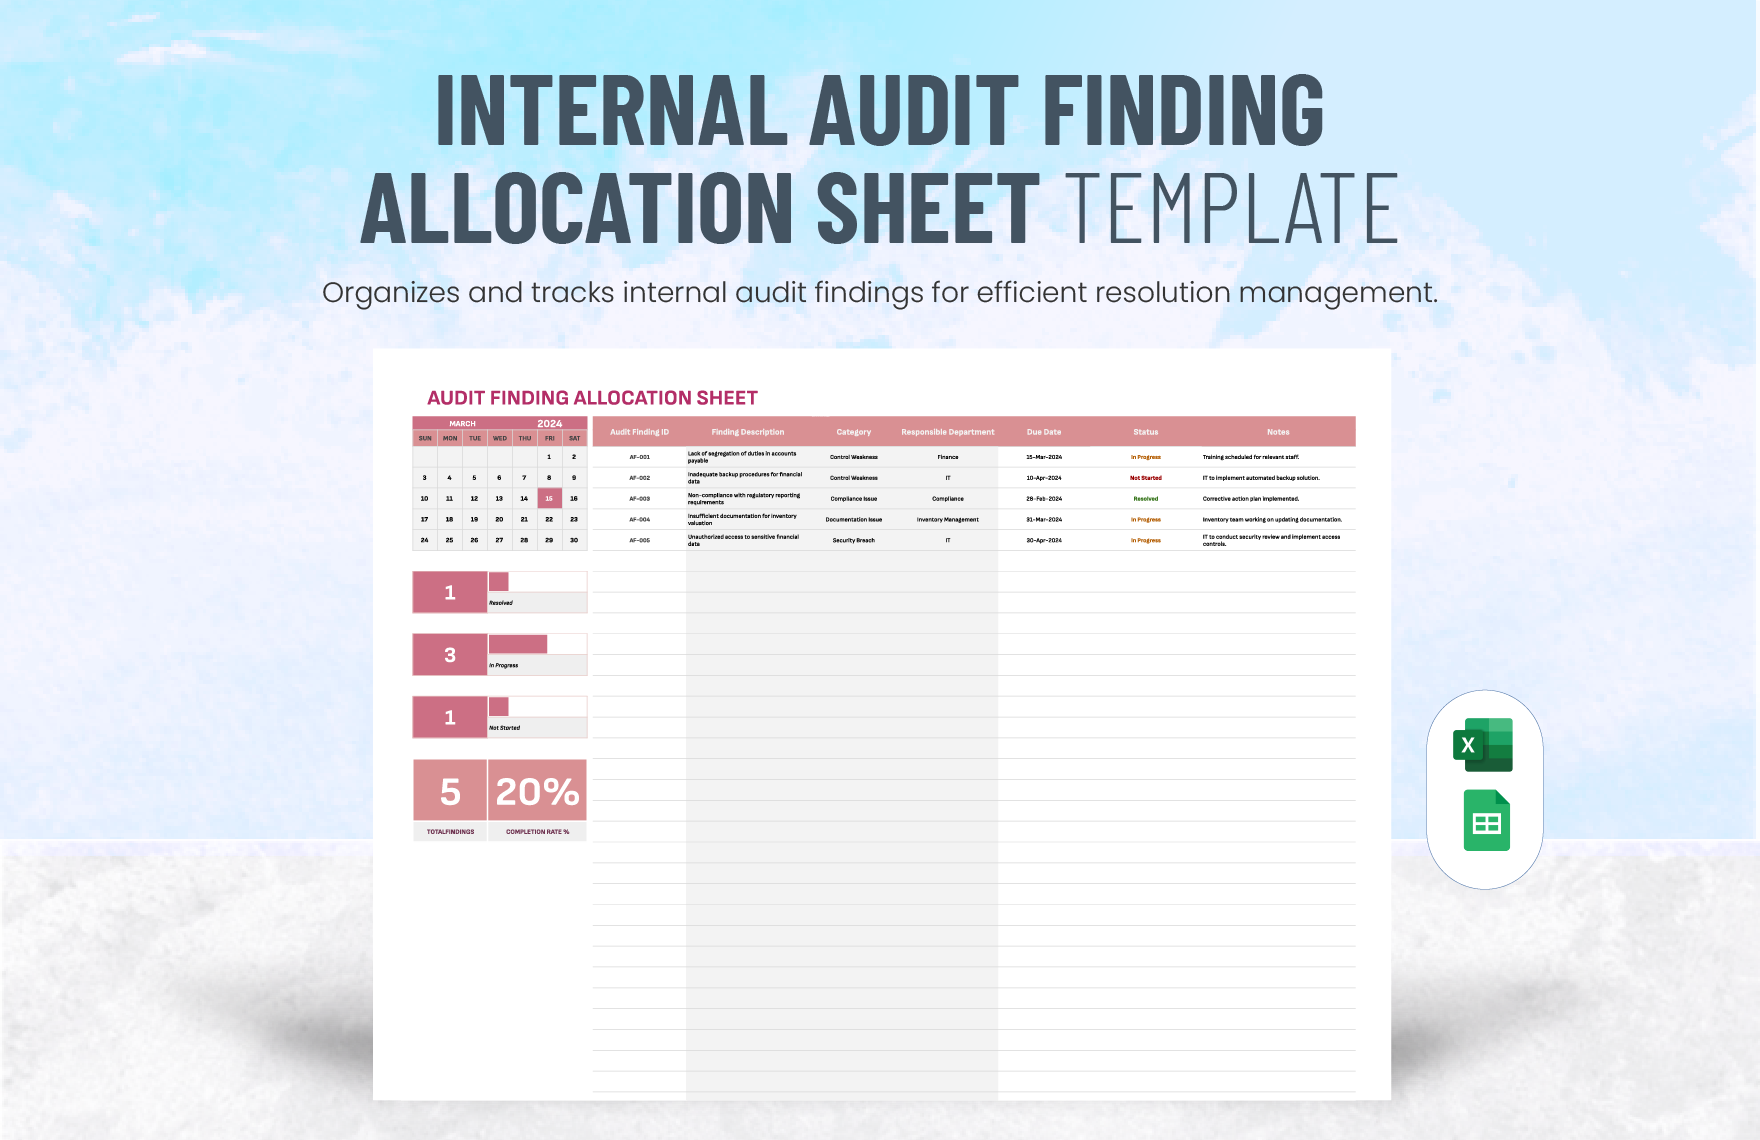 Internal Audit Finding Allocation Sheet Template in Excel, Google Sheets